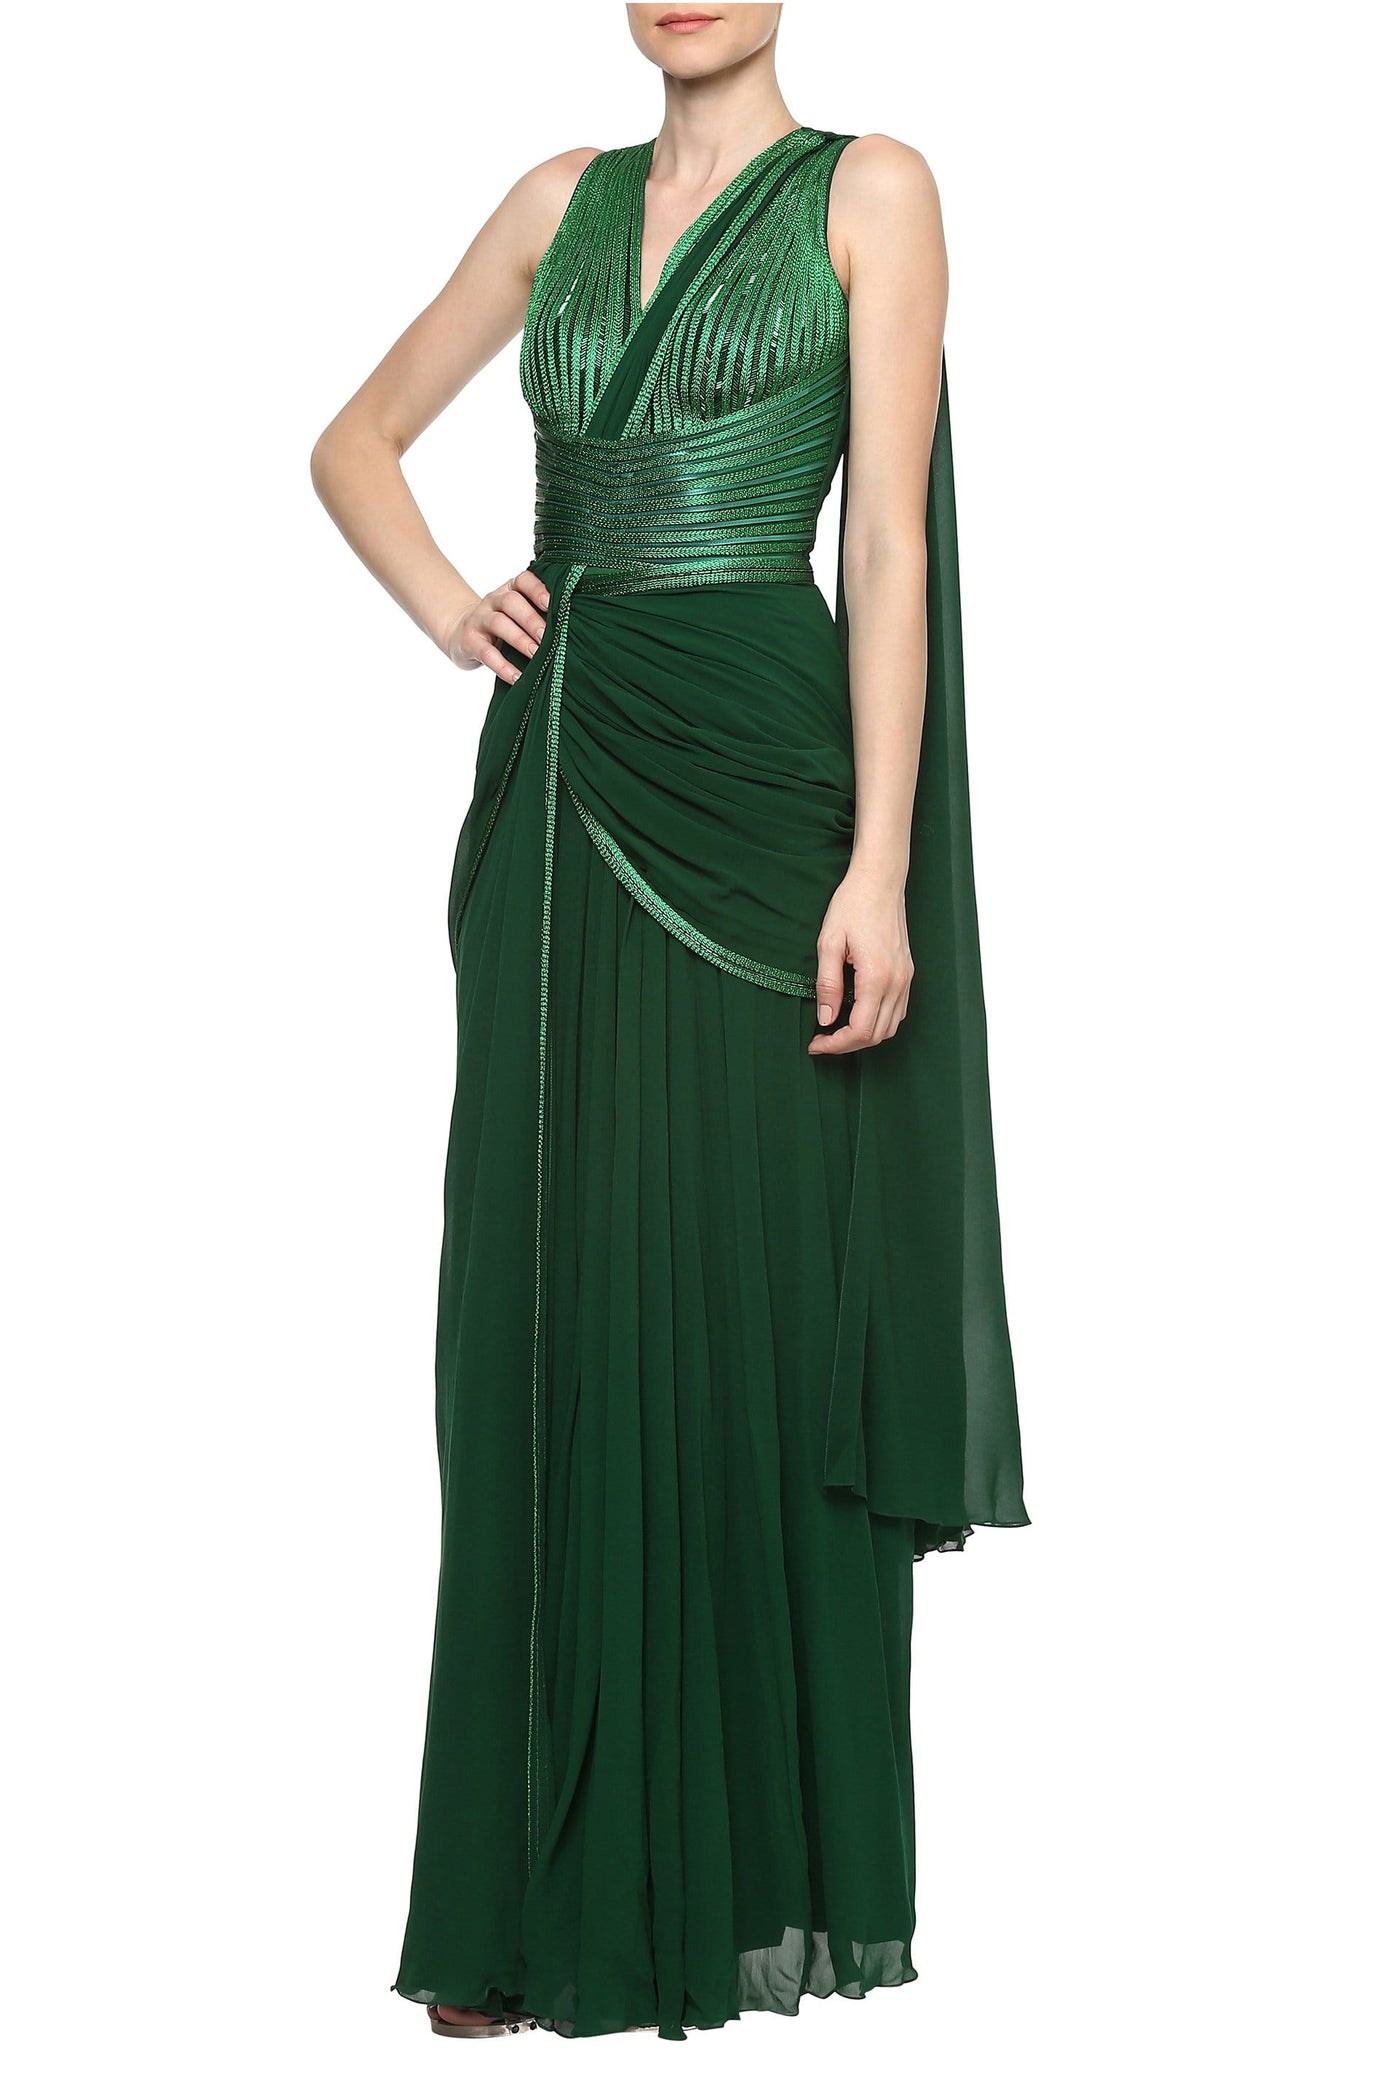 Emerald Pre-Stitched Saree With Moulded Metallic Bodice